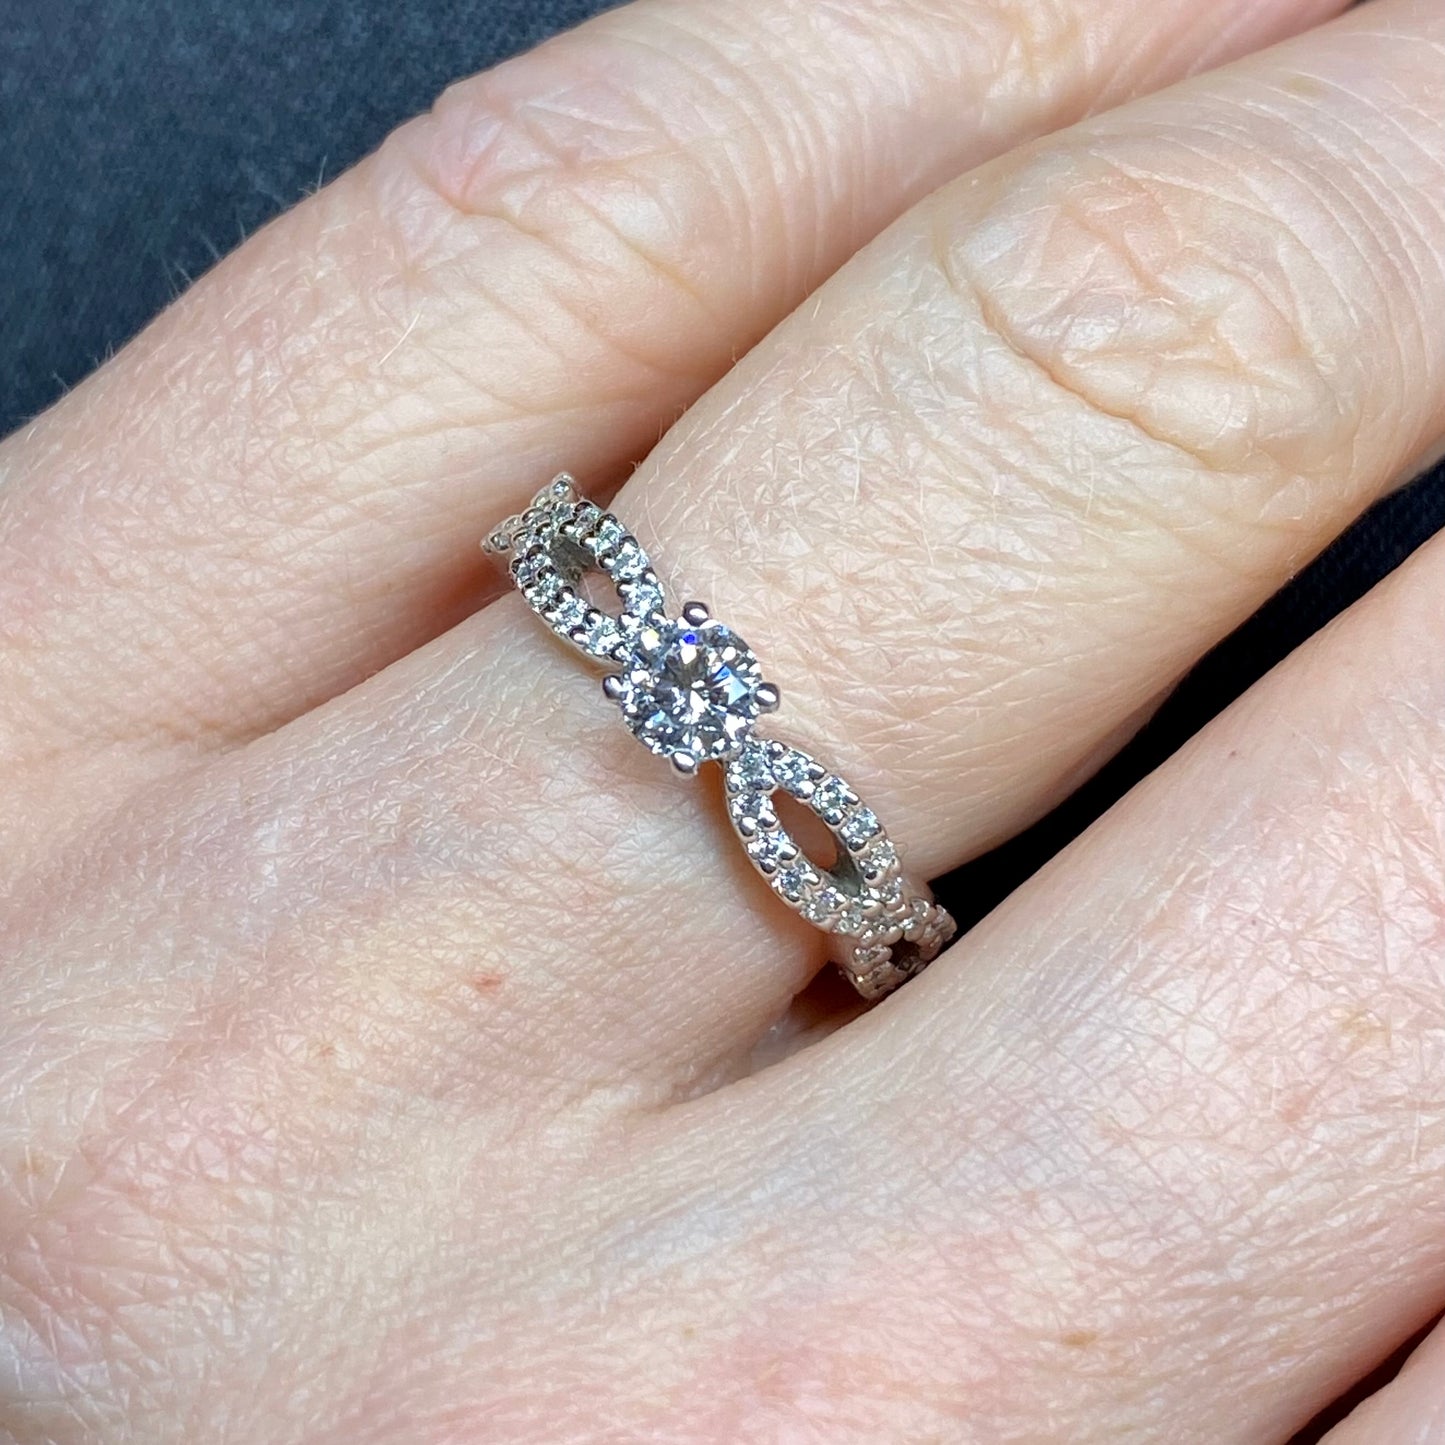 18ct White Gold 0.37ct Diamond Solitaire Engagement Ring | Infinity Shoulders - John Ross Jewellers